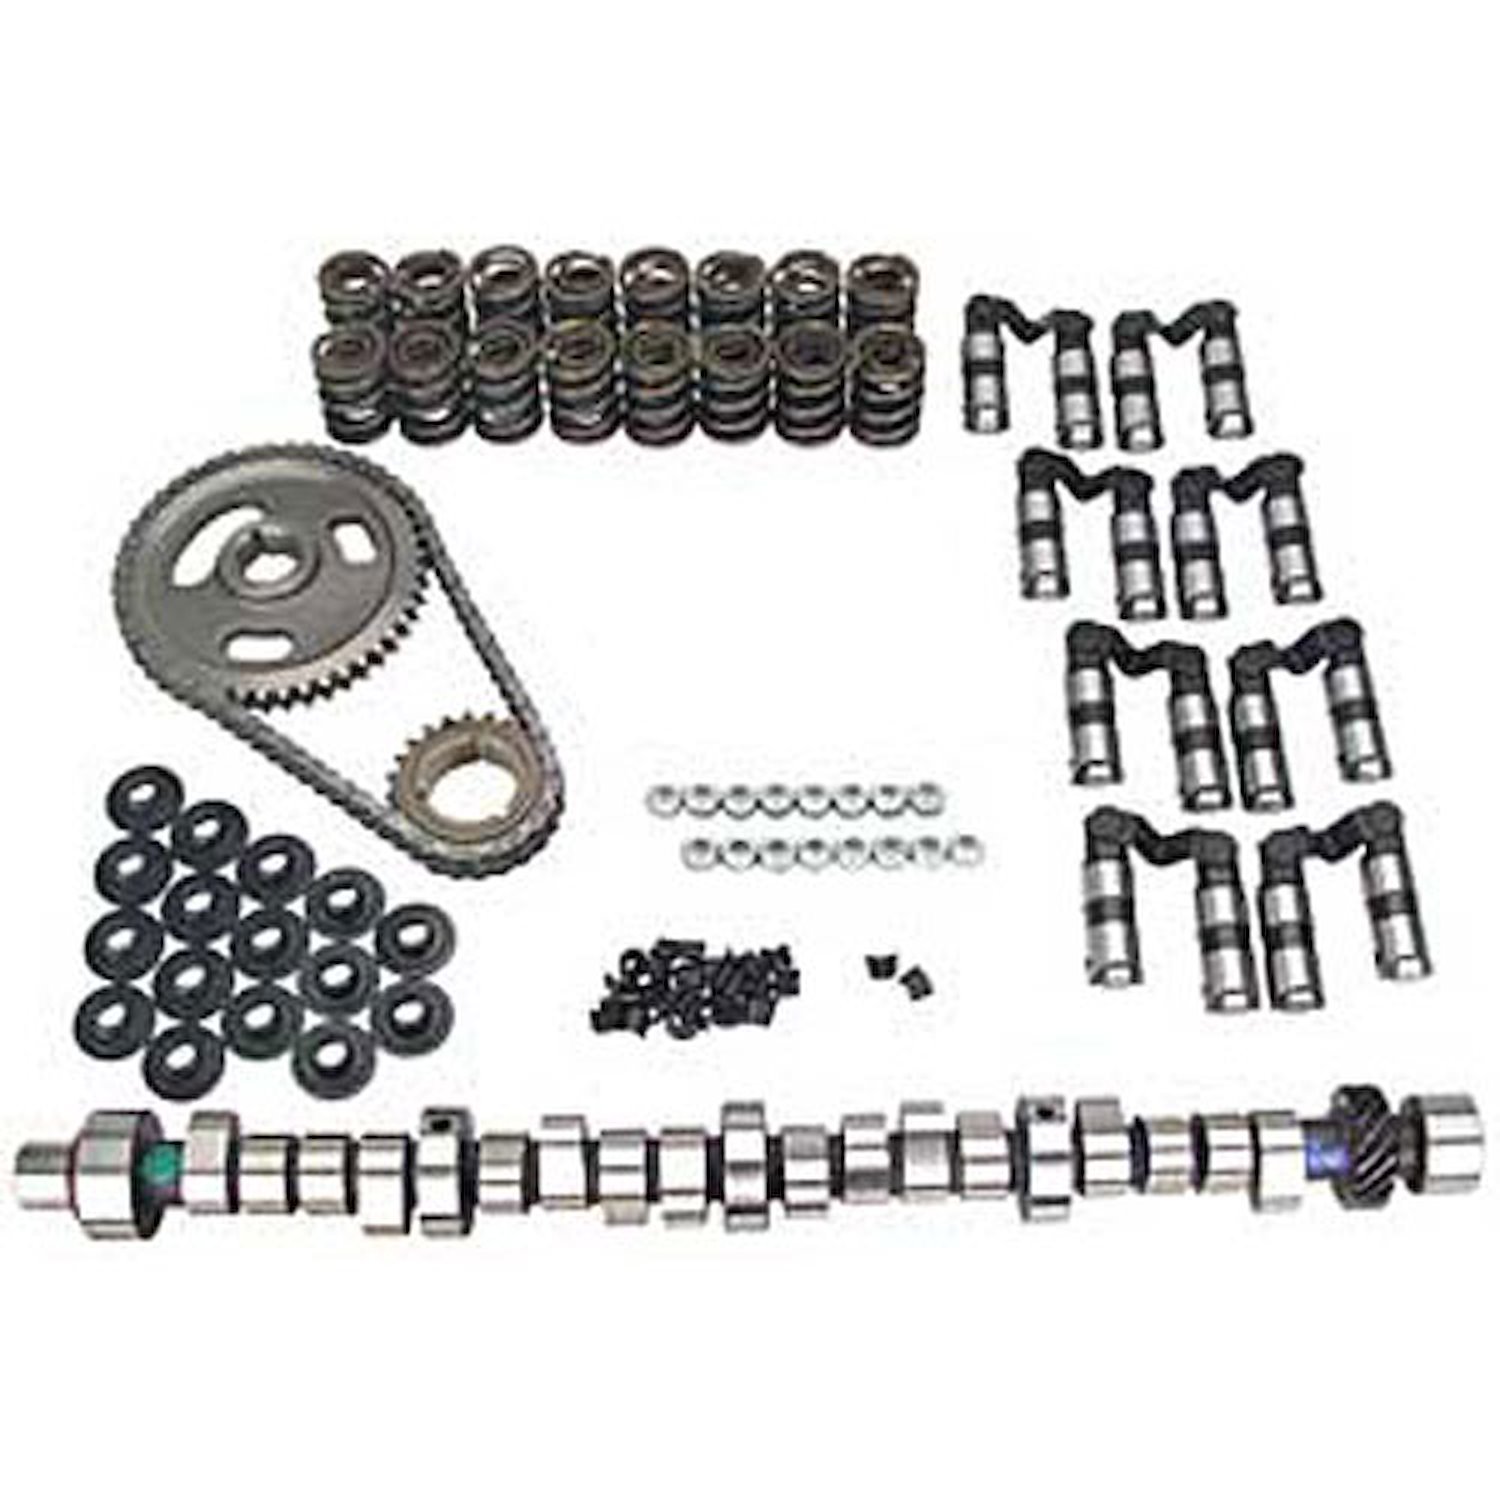 Magnum Mechanical Roller Cam Complete Kit Chevy Small Block 262-400ci 1955-98 Lift: .525"/.525"